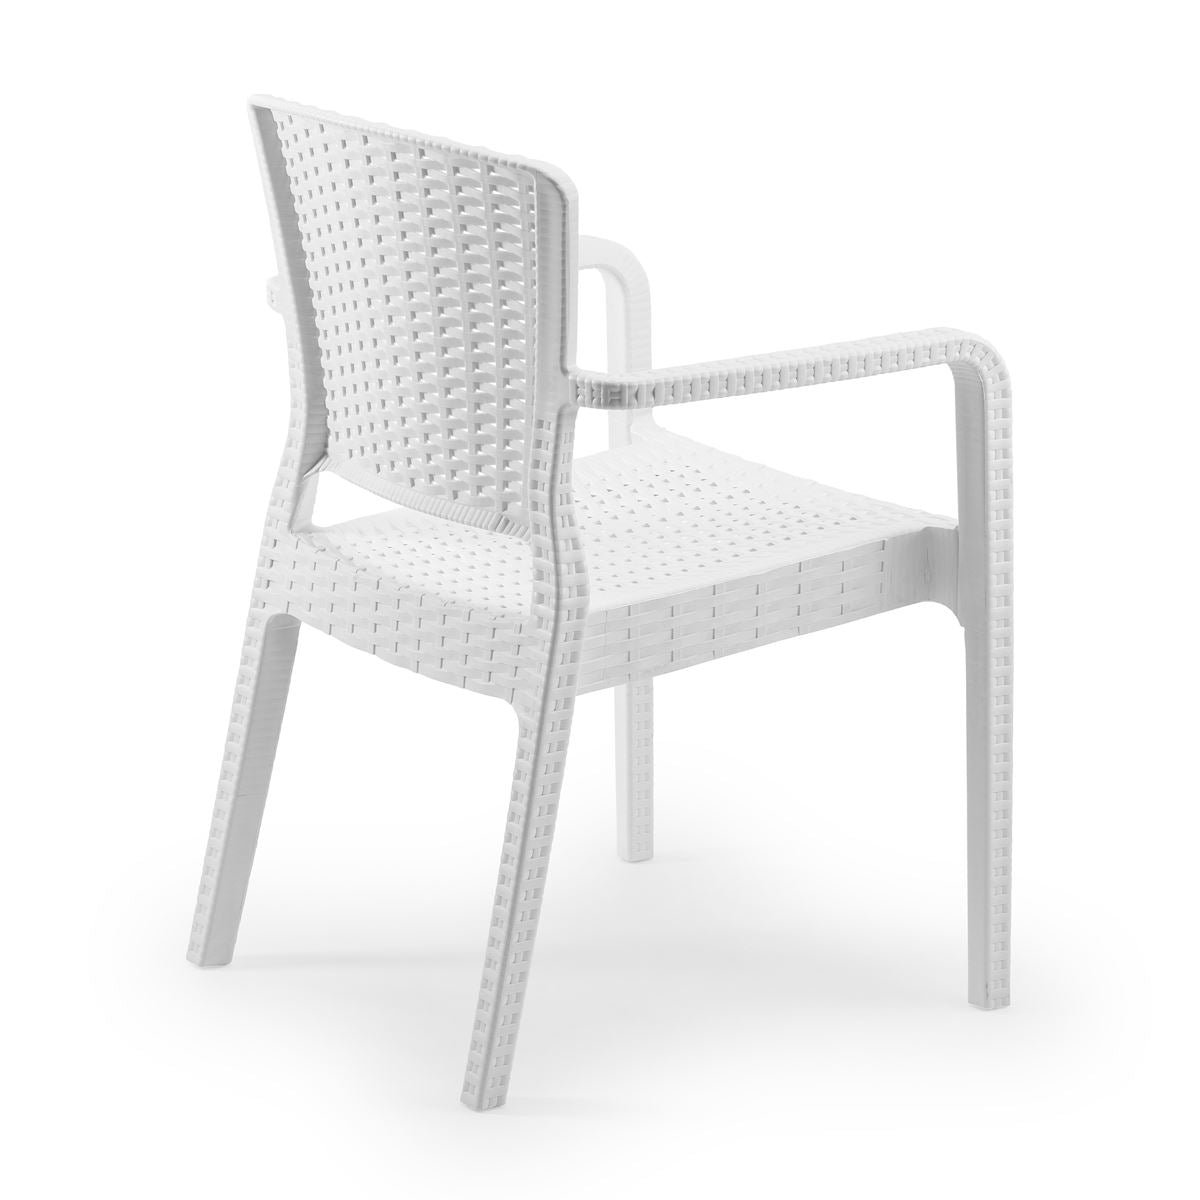 Dellonda Armchair Durable, Weather Resistant PP Body, Stackable x 6 - White